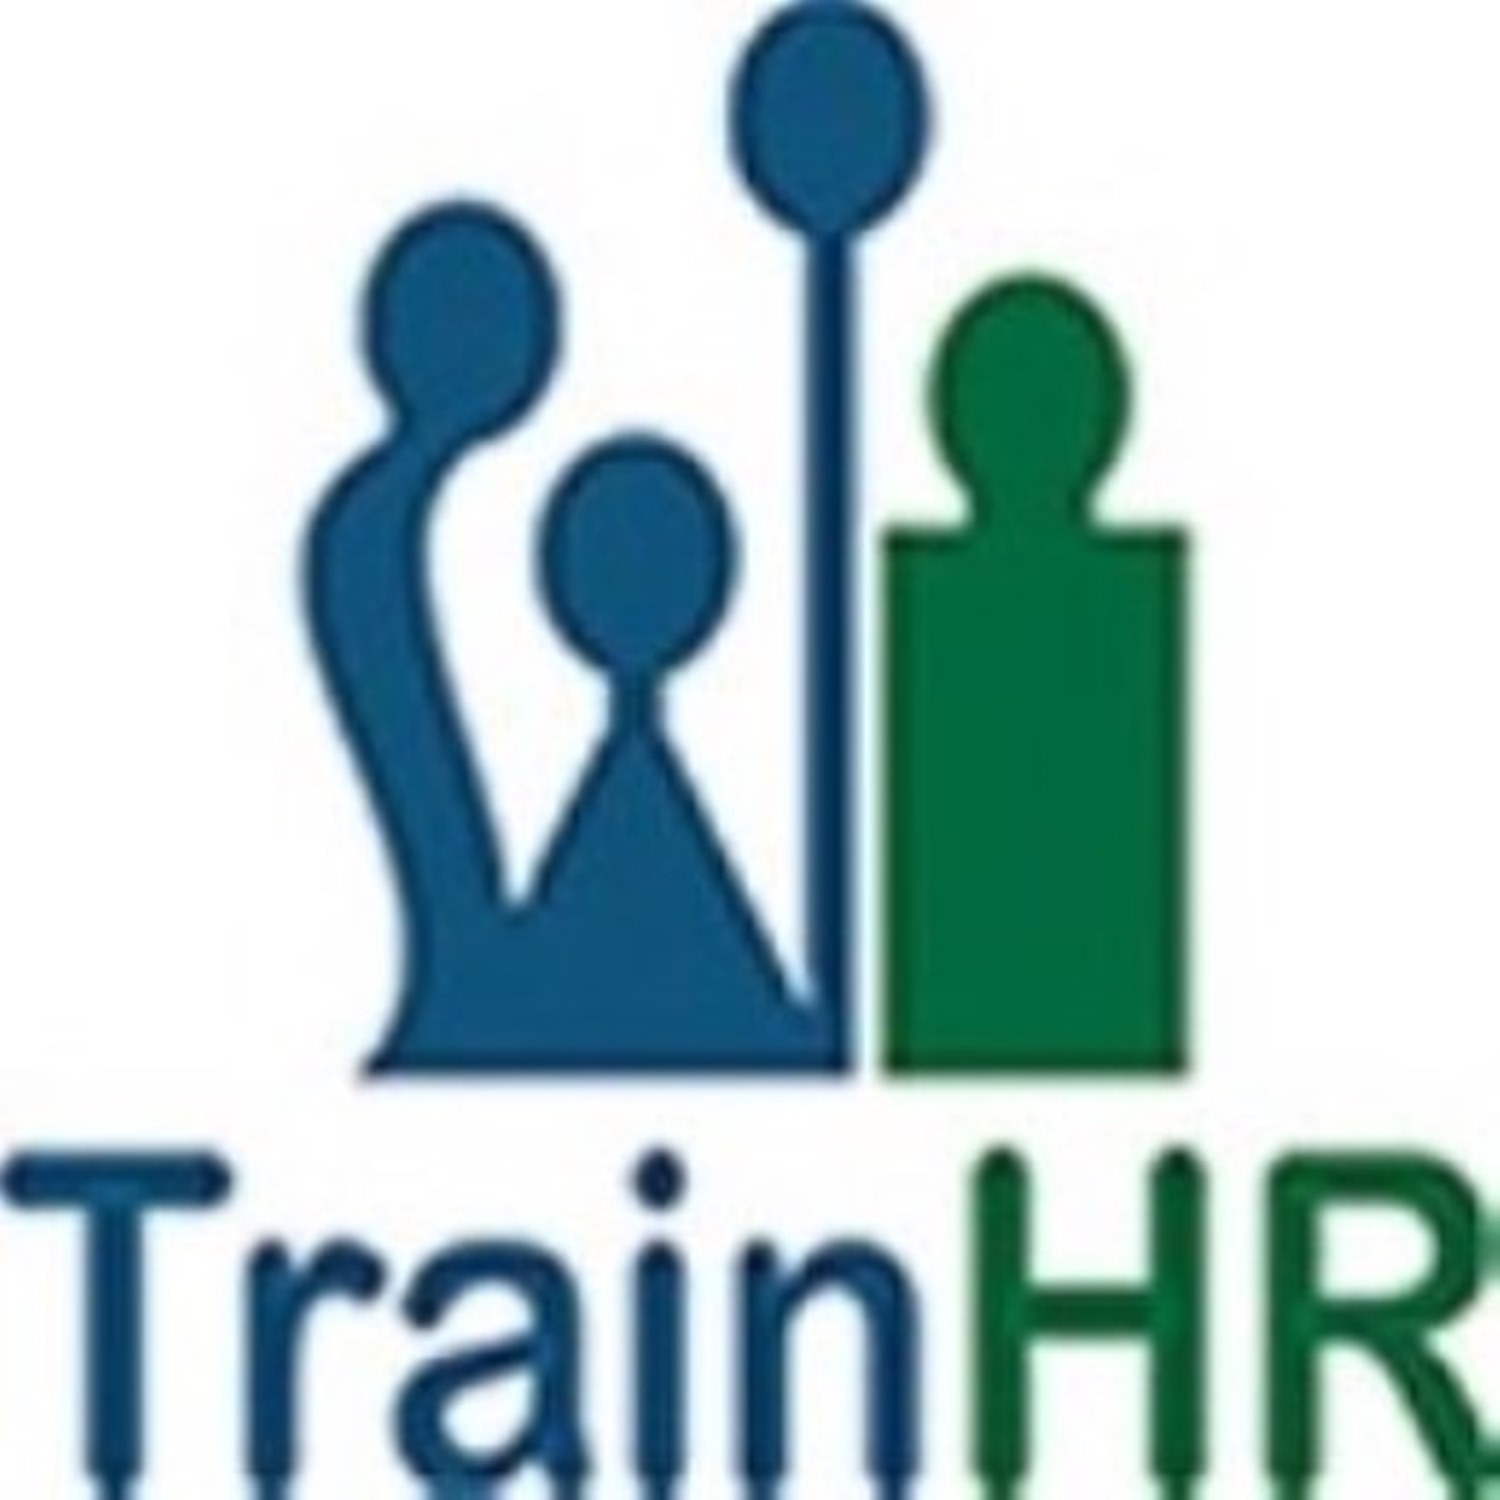 TrainHR is conducting a Webinar on Technical Writing Essentials, Fremont, California, United States